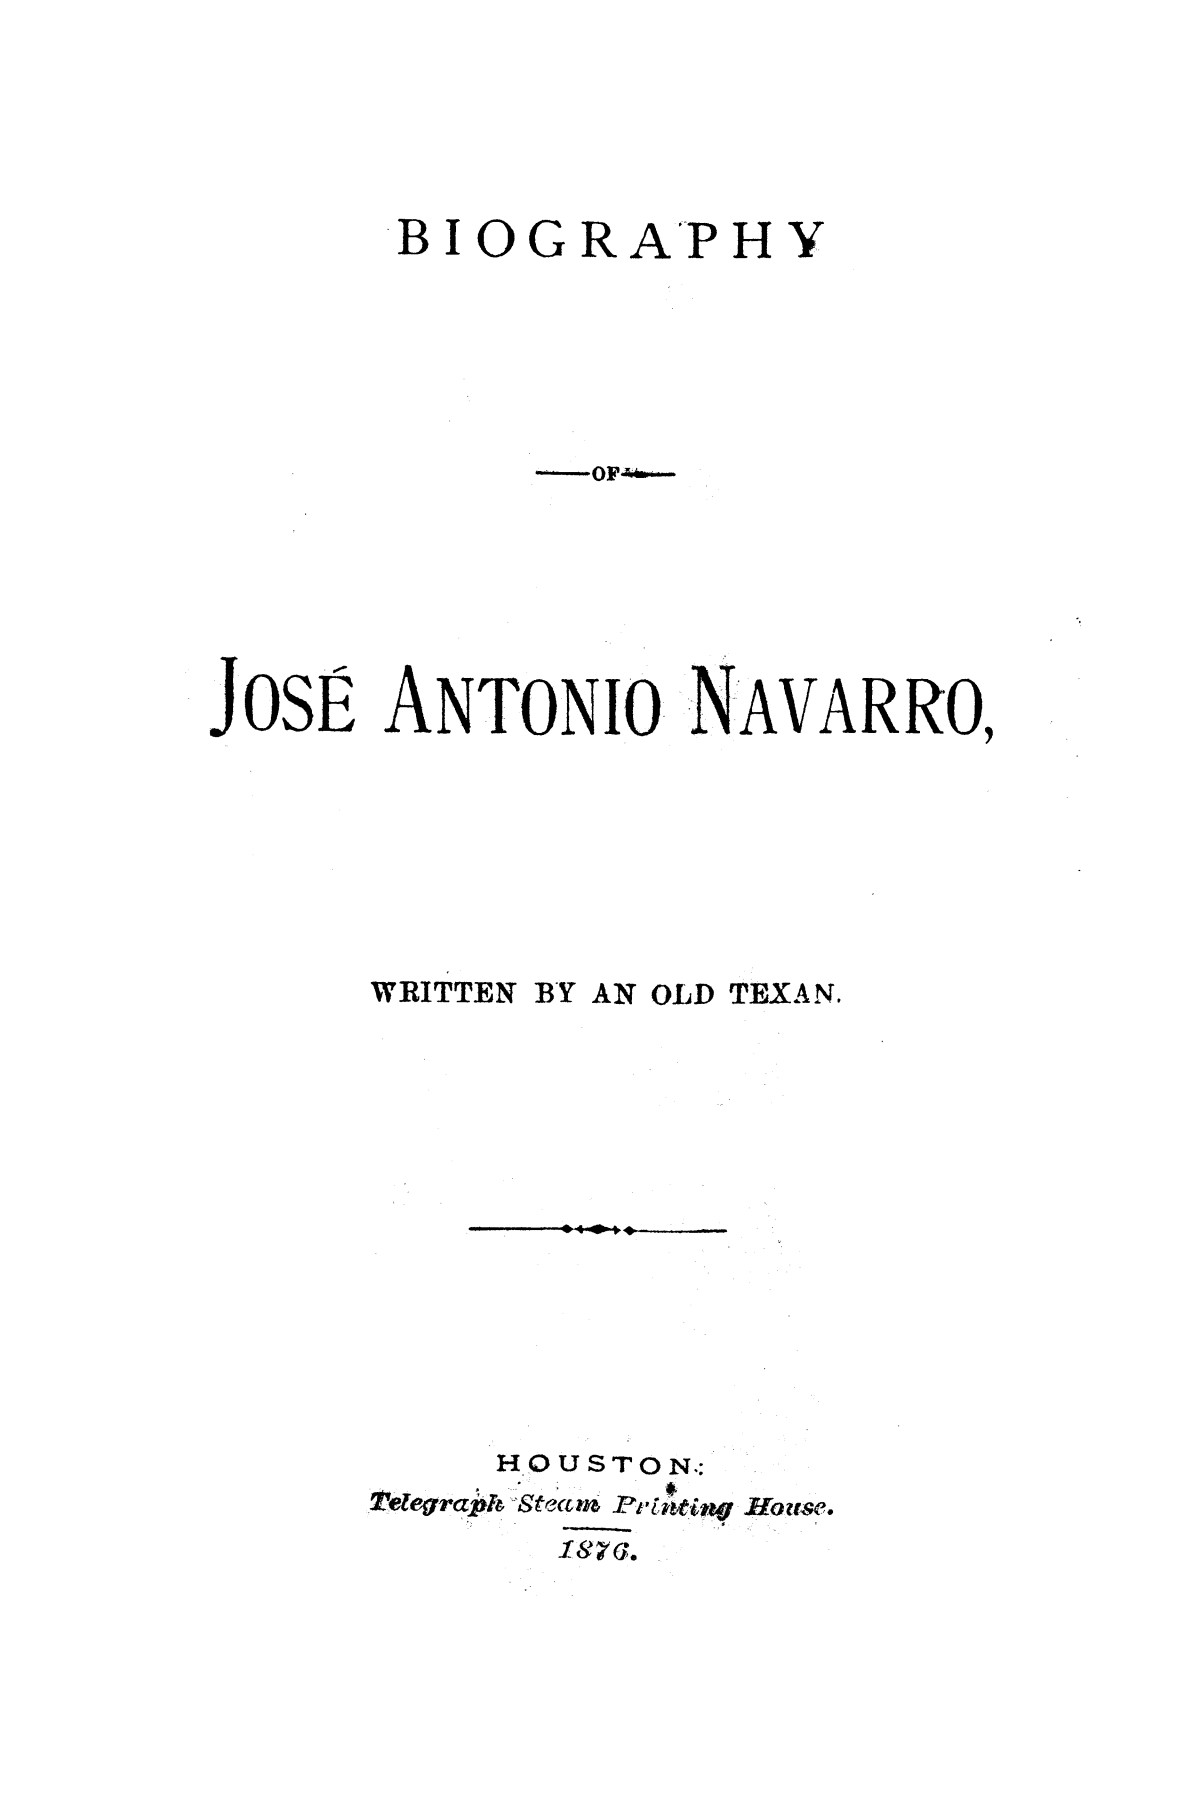 Biography of José Antonio Navarro, written by an Old Texan.
                                                
                                                    [Sequence #]: 1 of 30
                                                